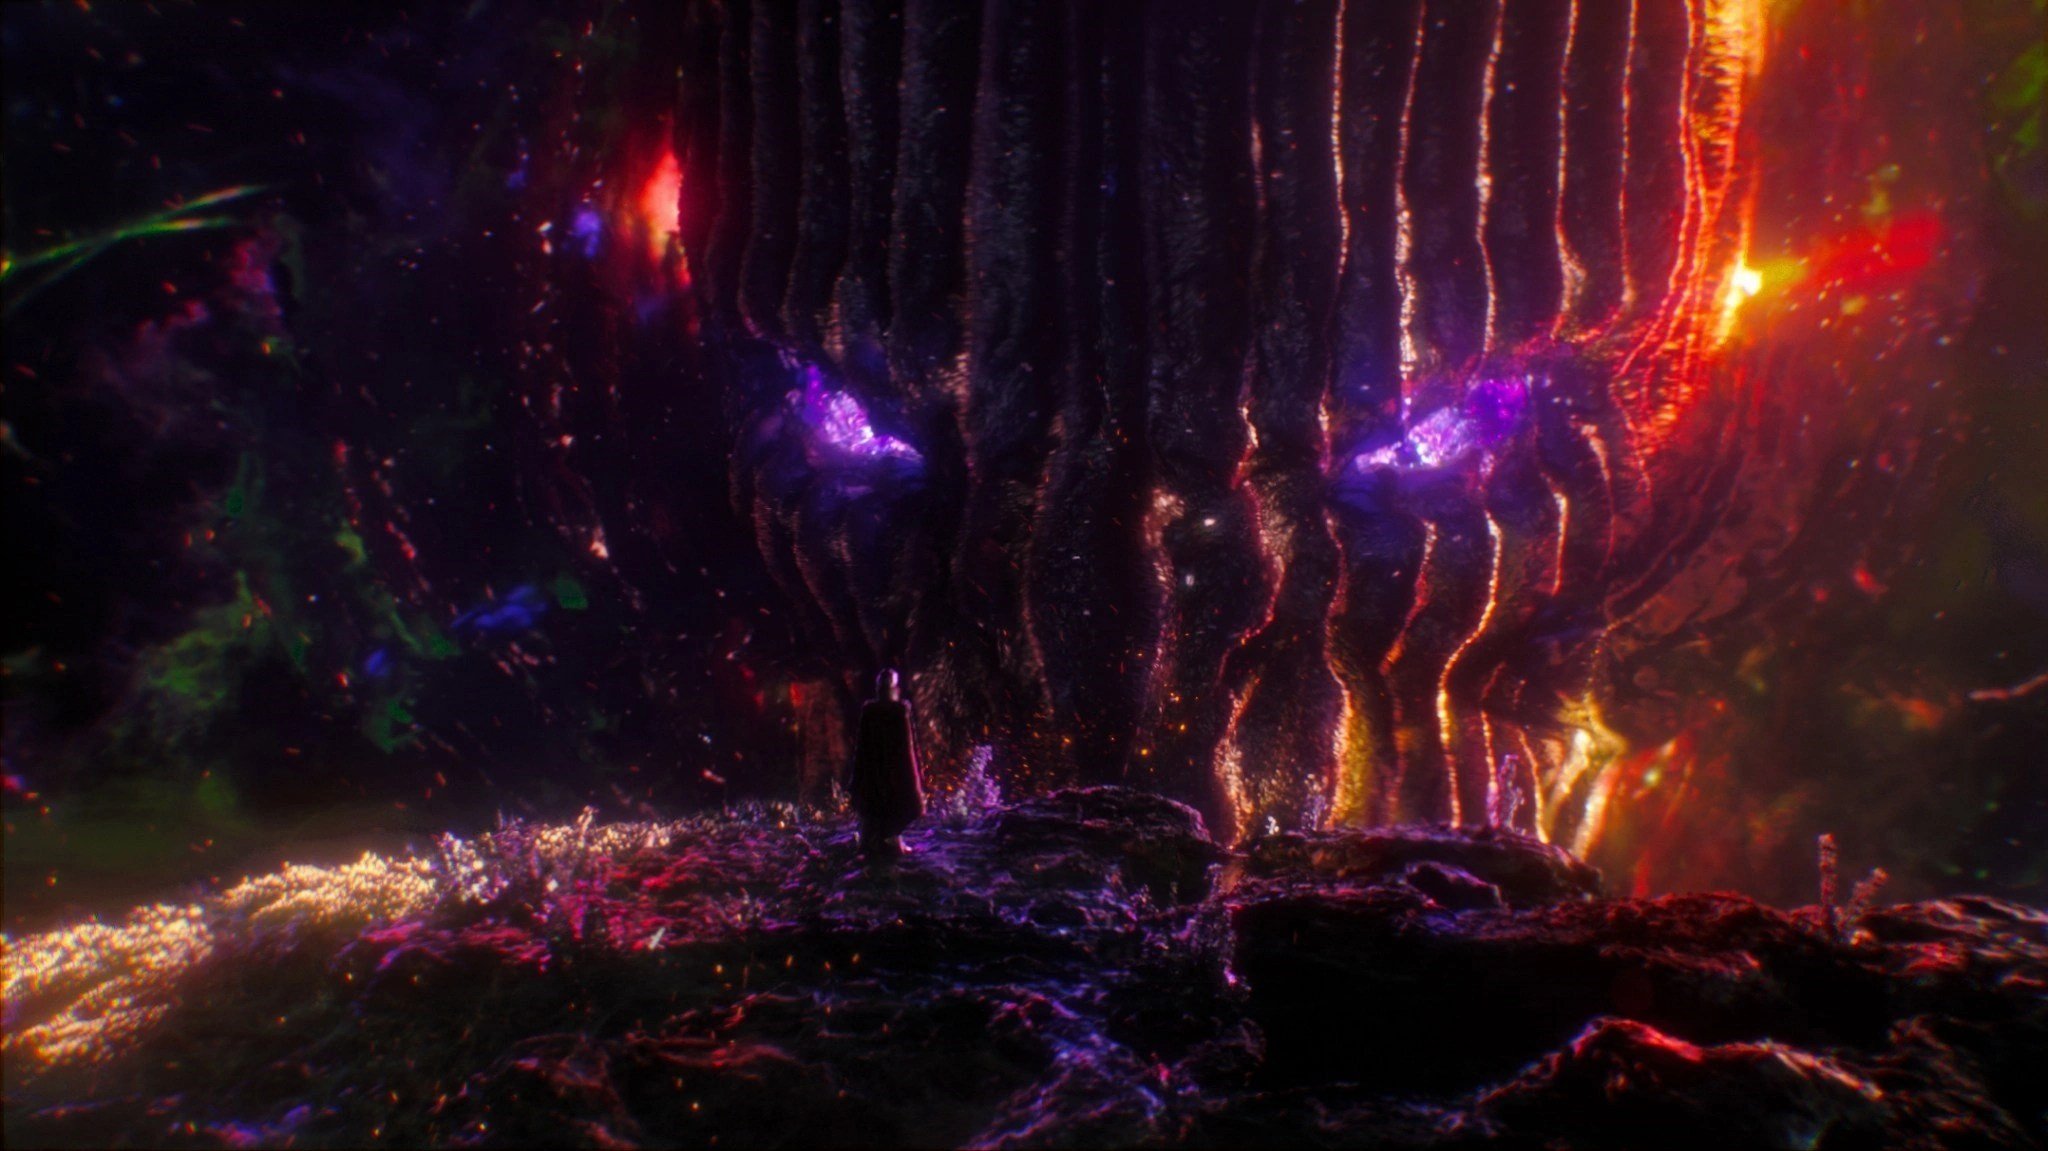 Doctor Strange (Benedict Cumberbatch) faces off with the inter-dimensional villain Dormammu in 'Doctor Strange'